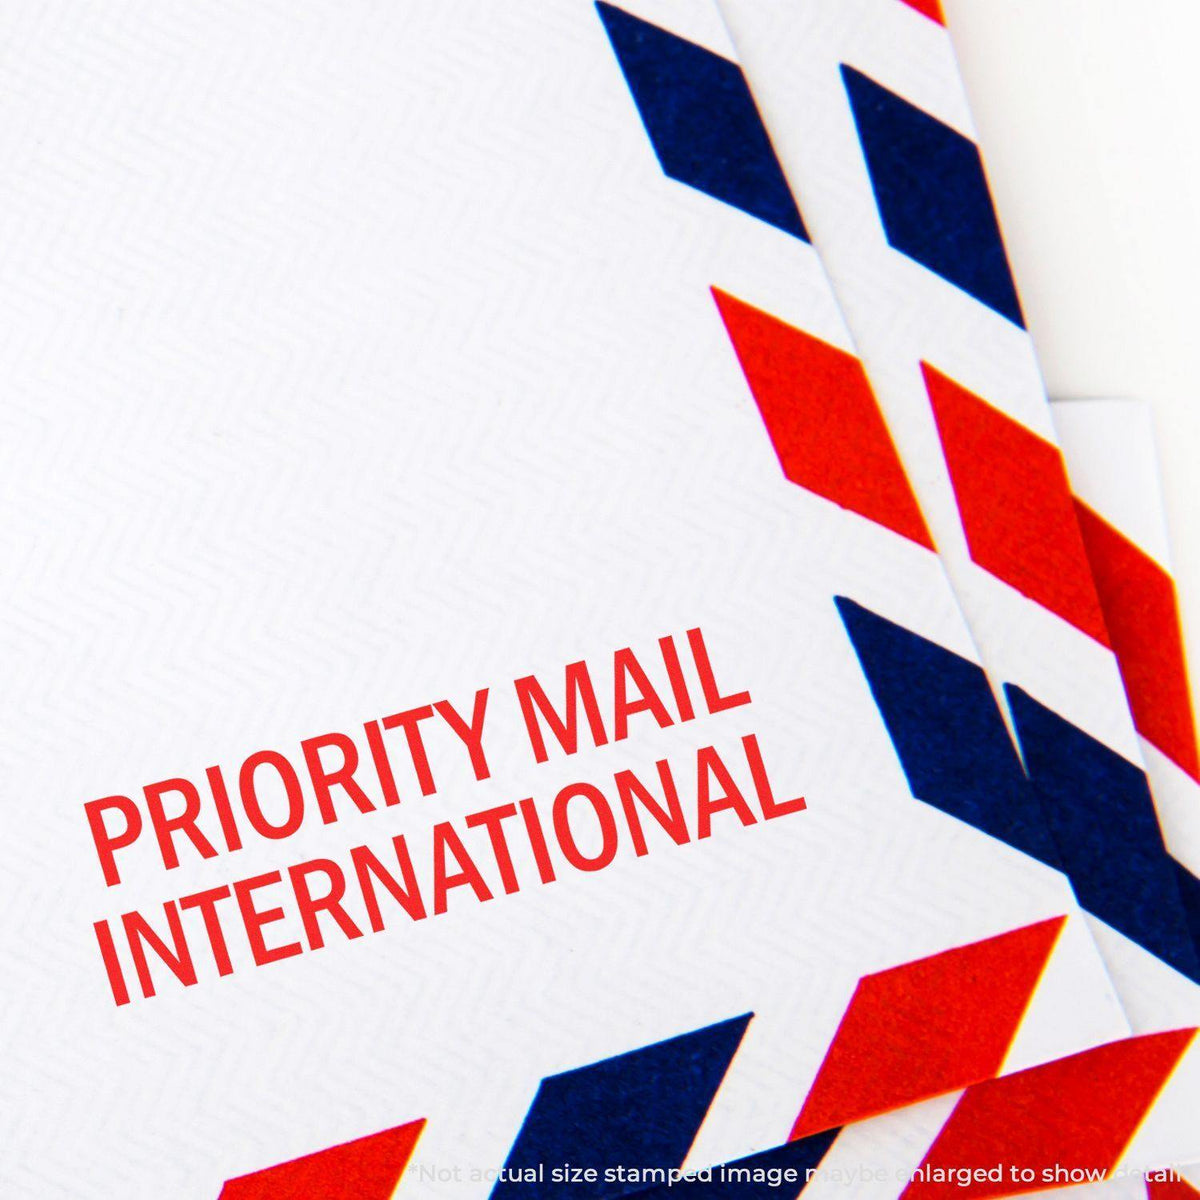 Large Priority Mail International Rubber Stamp Lifestyle Photo